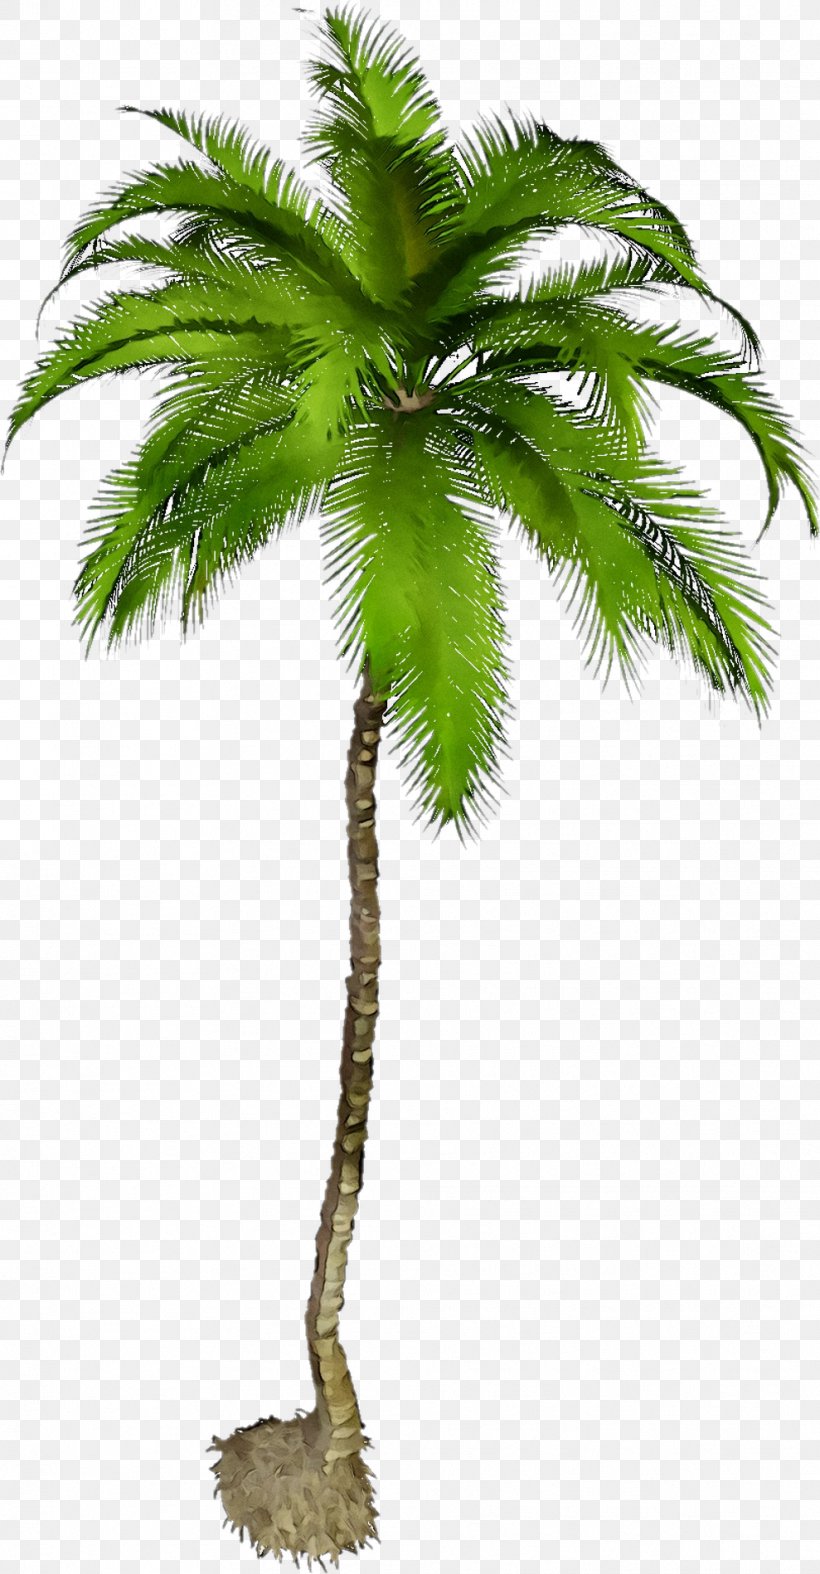 Clip Art Image Palm Trees Graphic Design, PNG, 989x1899px, Palm Trees ...